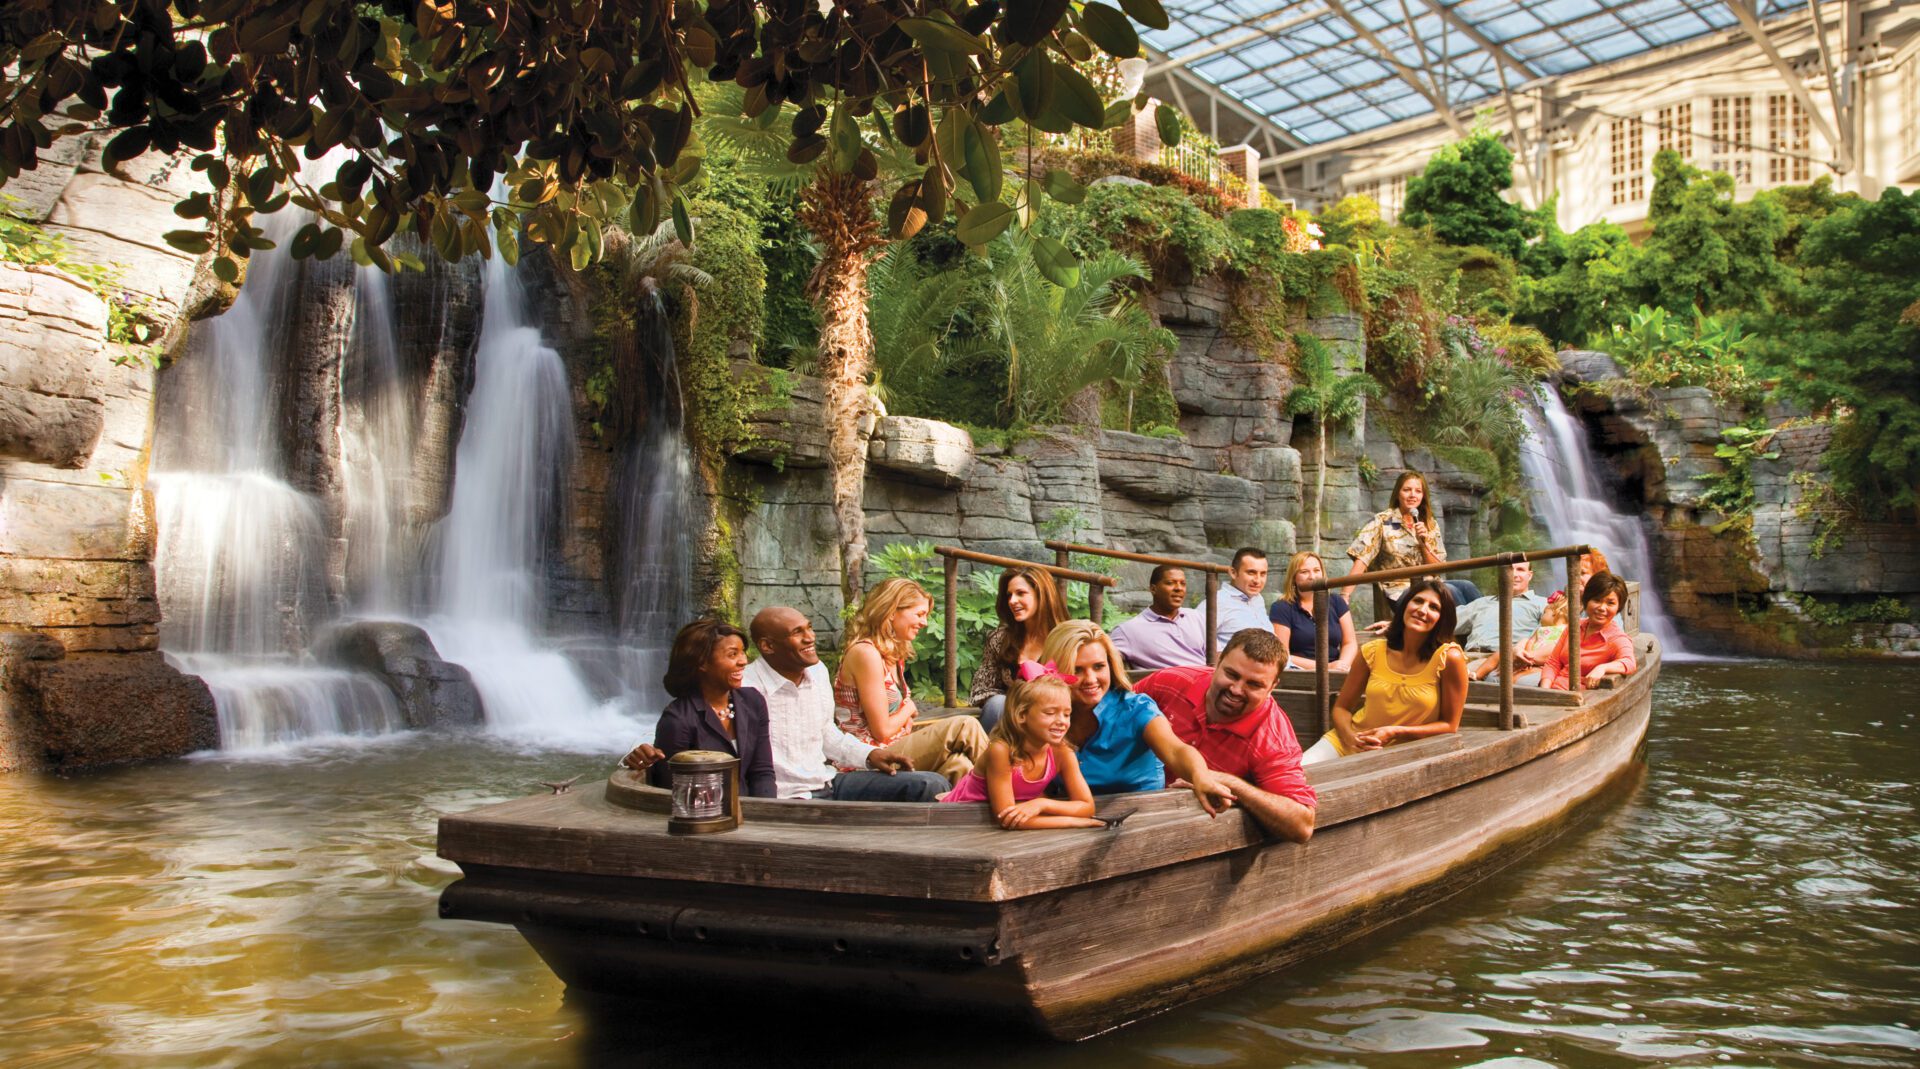 Delta Flatboat, family activities in Nashville at Once Upon a Spring at Gaylord Opryland Resort, spring-themed boat rides, sweet treats to decorate (and eat!), an Easter Bunny meet & greet, and other crafty, educational, and all-around exciting activities for the entire family.